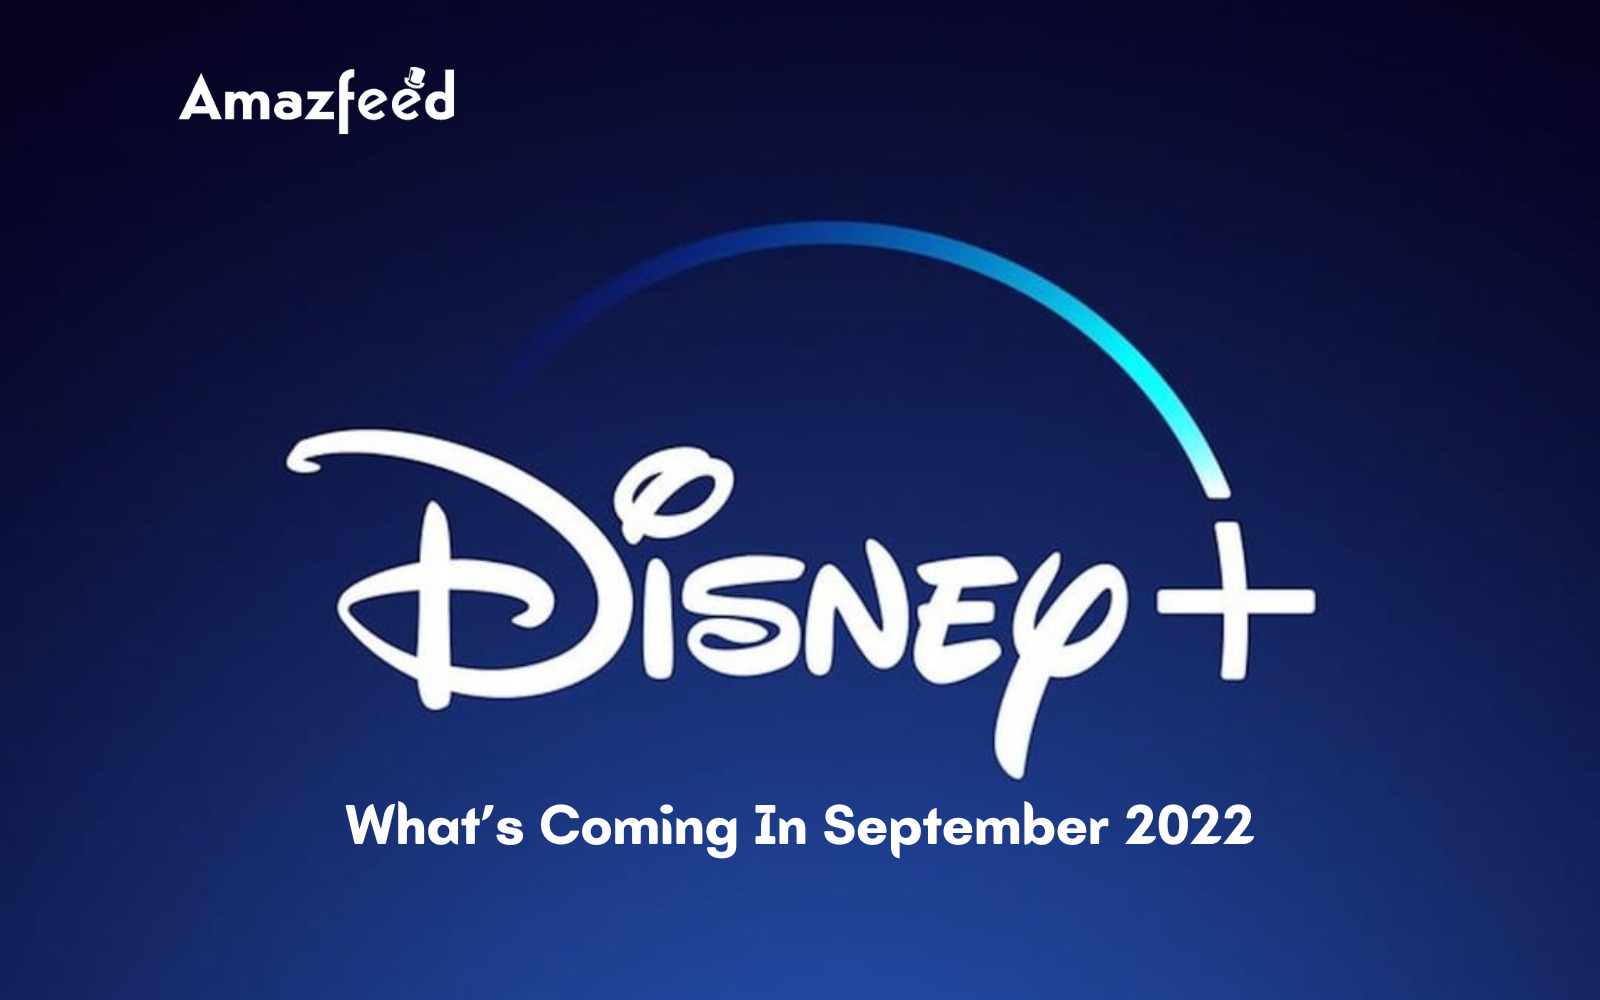 What’s Coming In September 2022 On Disney+